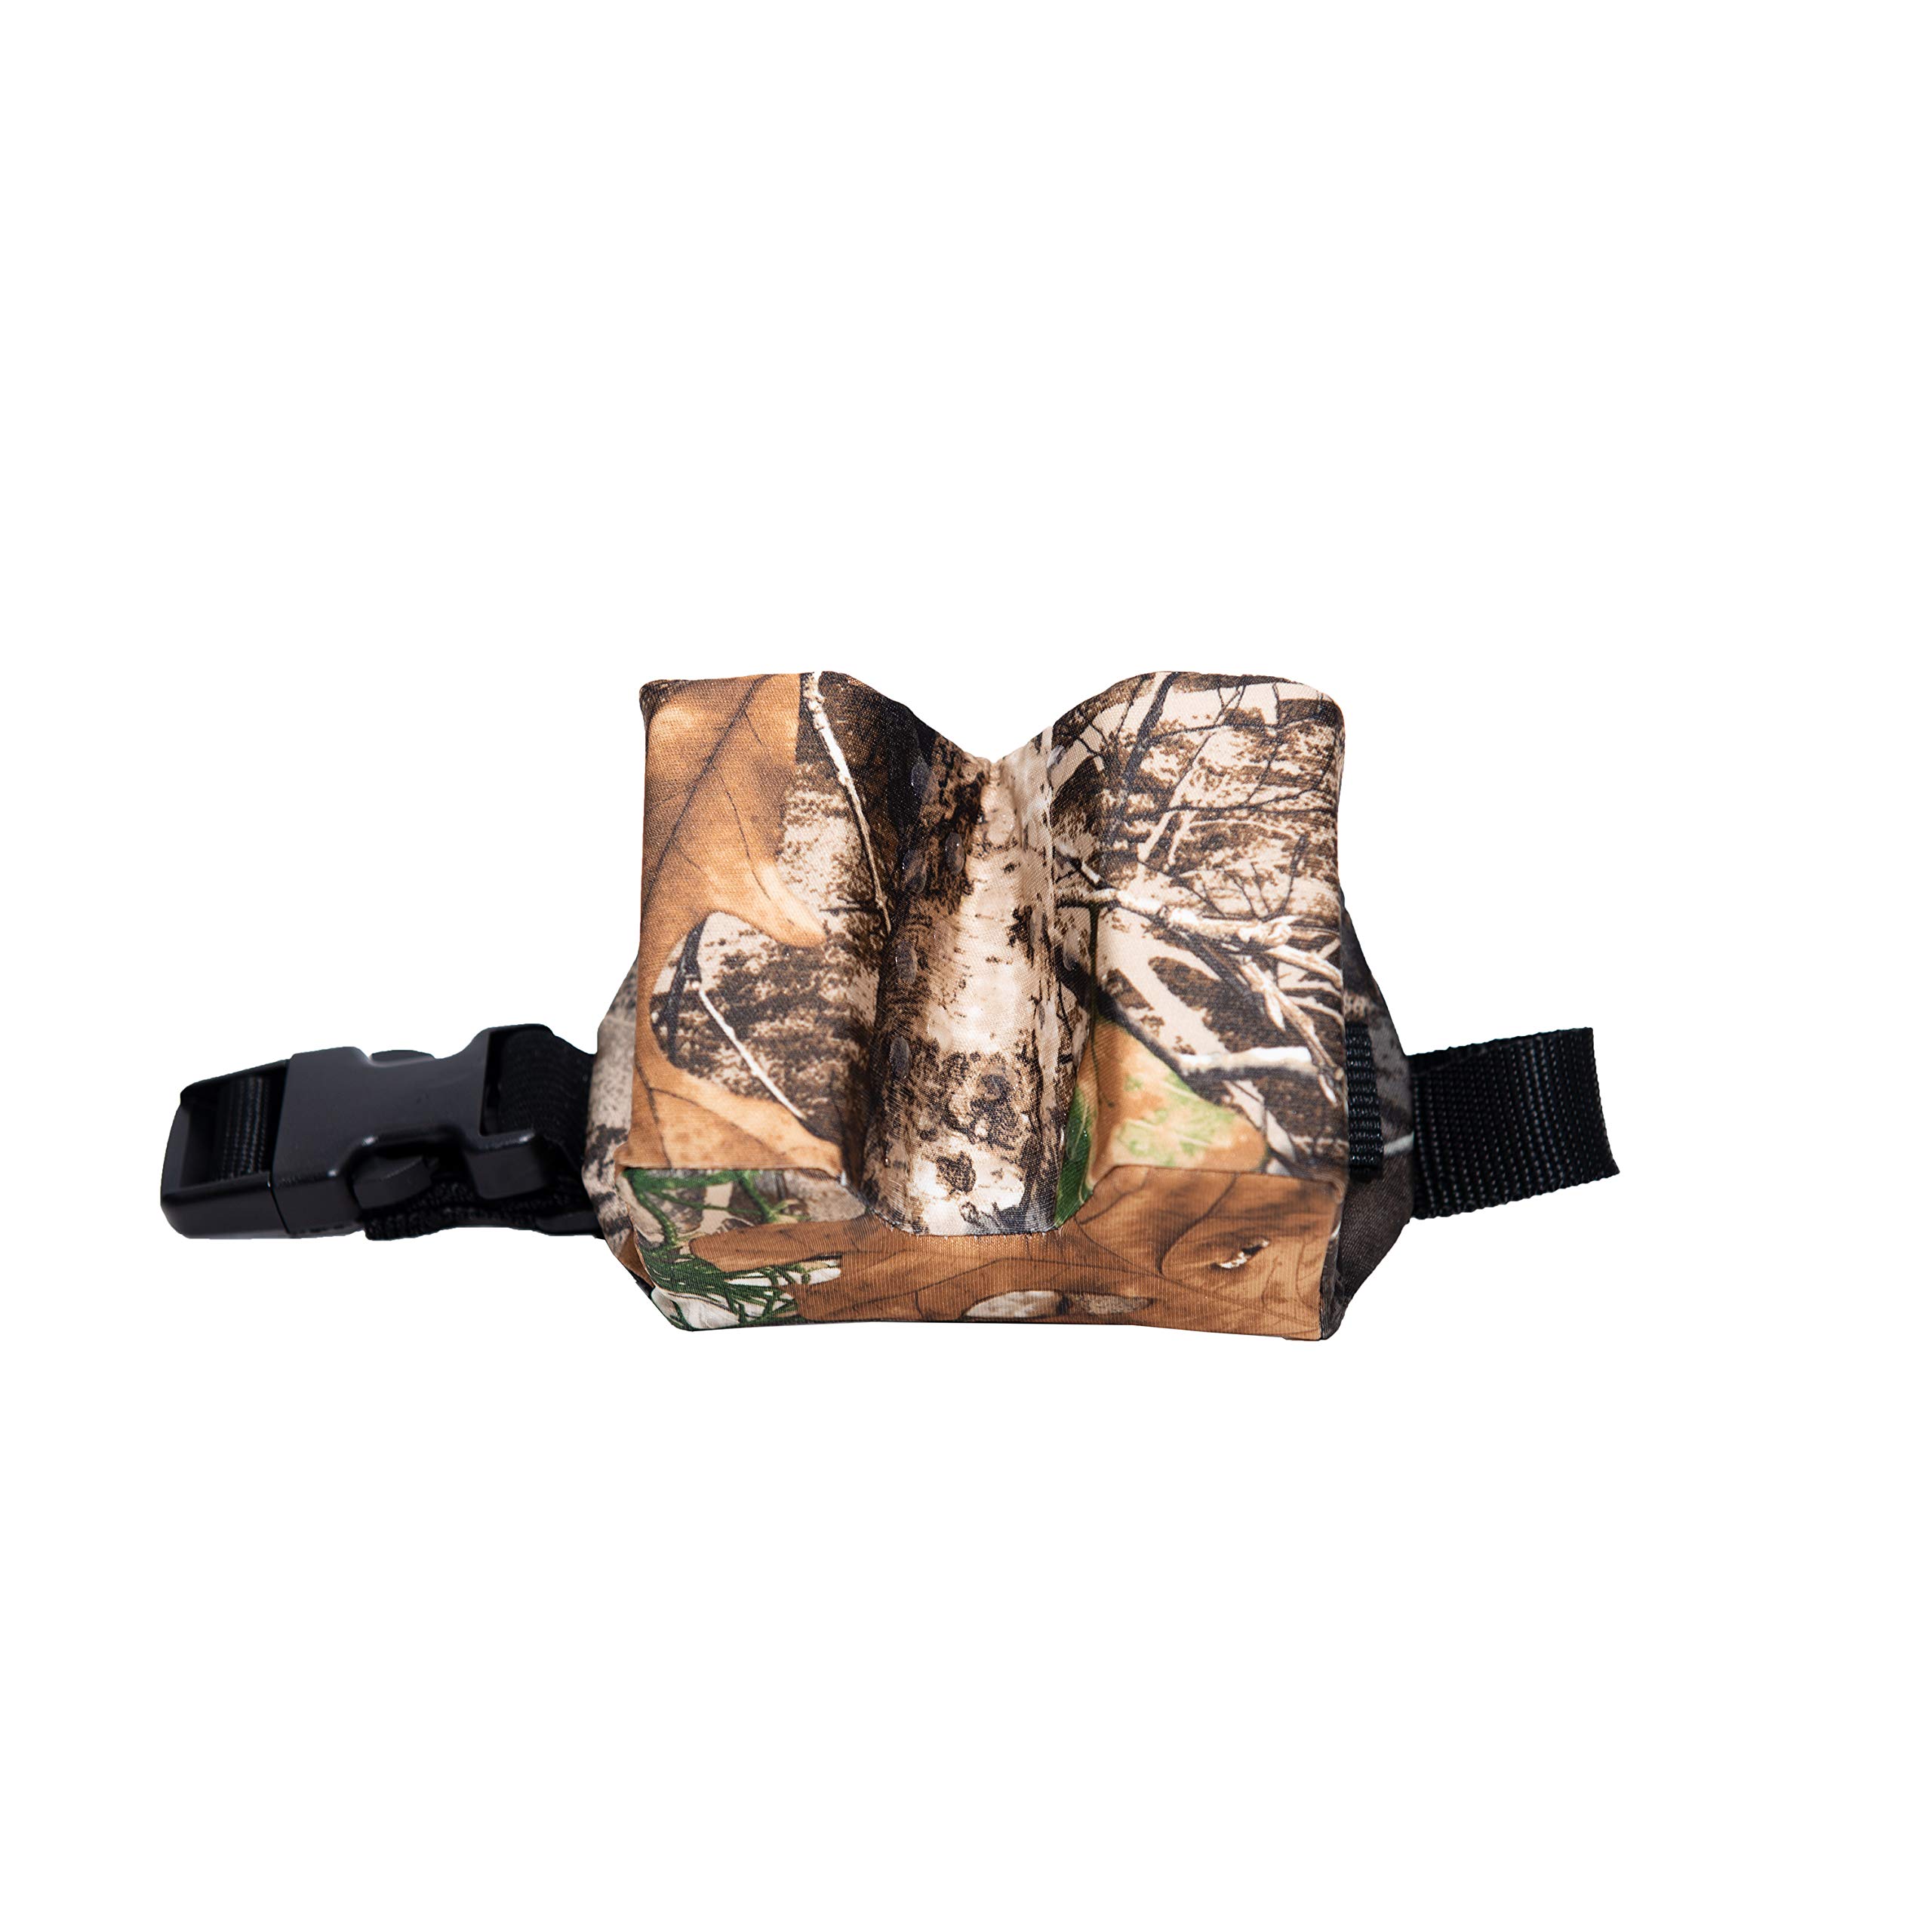 Realtree Camo Strut Shooting Gun Rest and Turkey Mouth Call Pouch Combo for Turkey Hunting